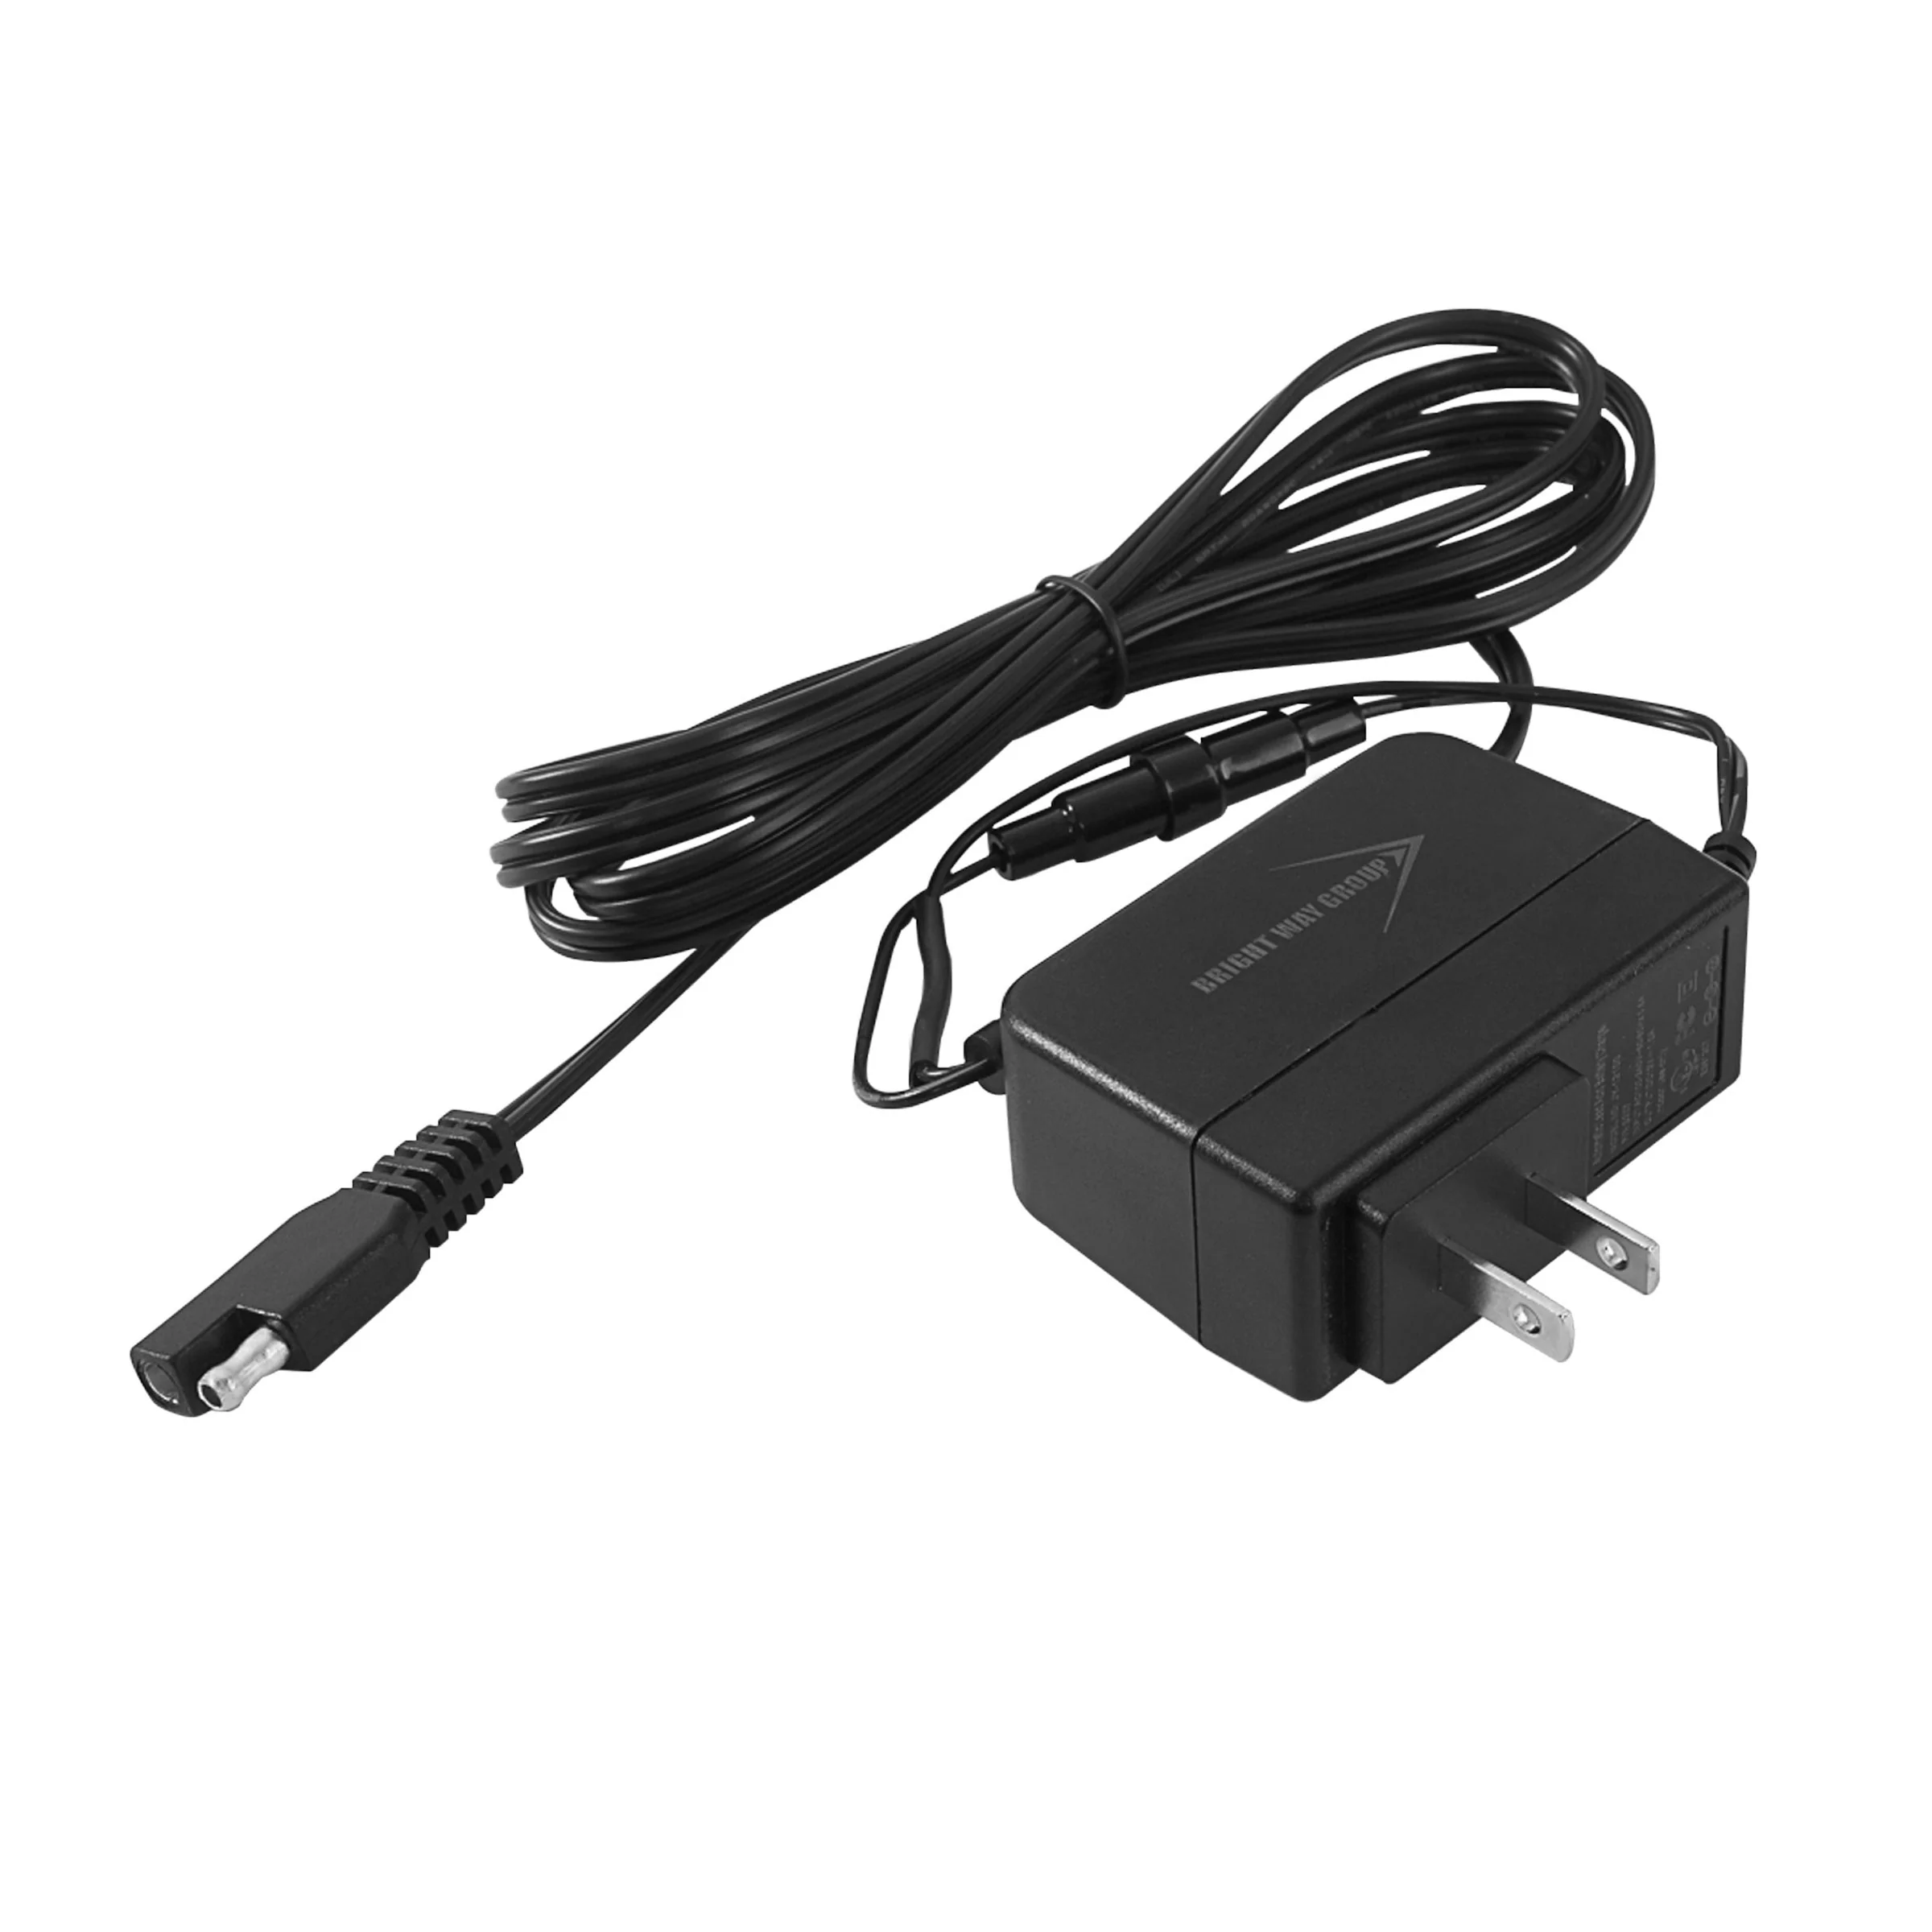 YP-BBK-CHGR Replacement Yak Power Battery Box Trickle Charger Questions & Answers